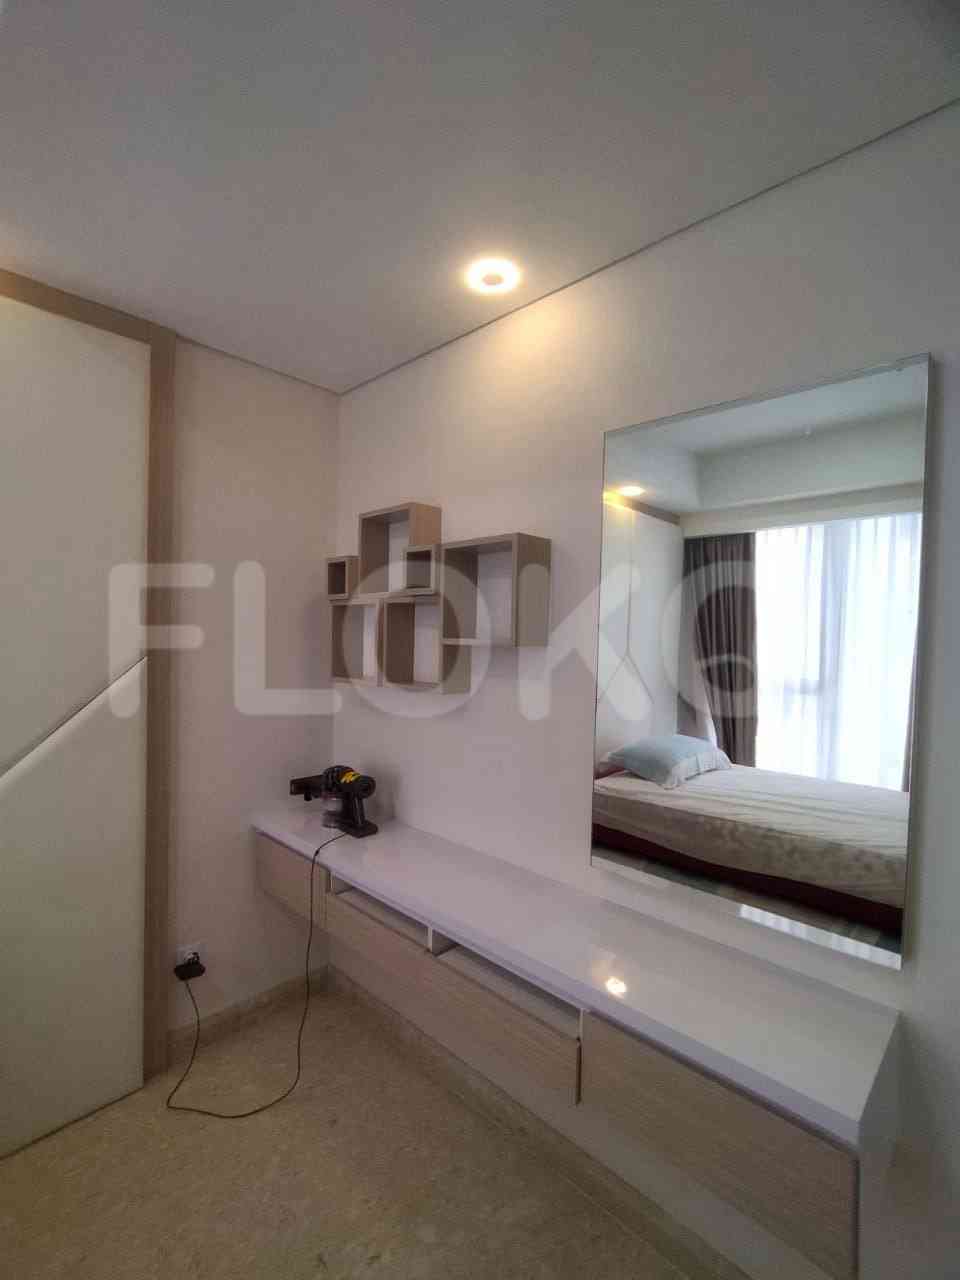 3 Bedroom on 25th Floor for Rent in Gold Coast Apartment - fka8f3 8